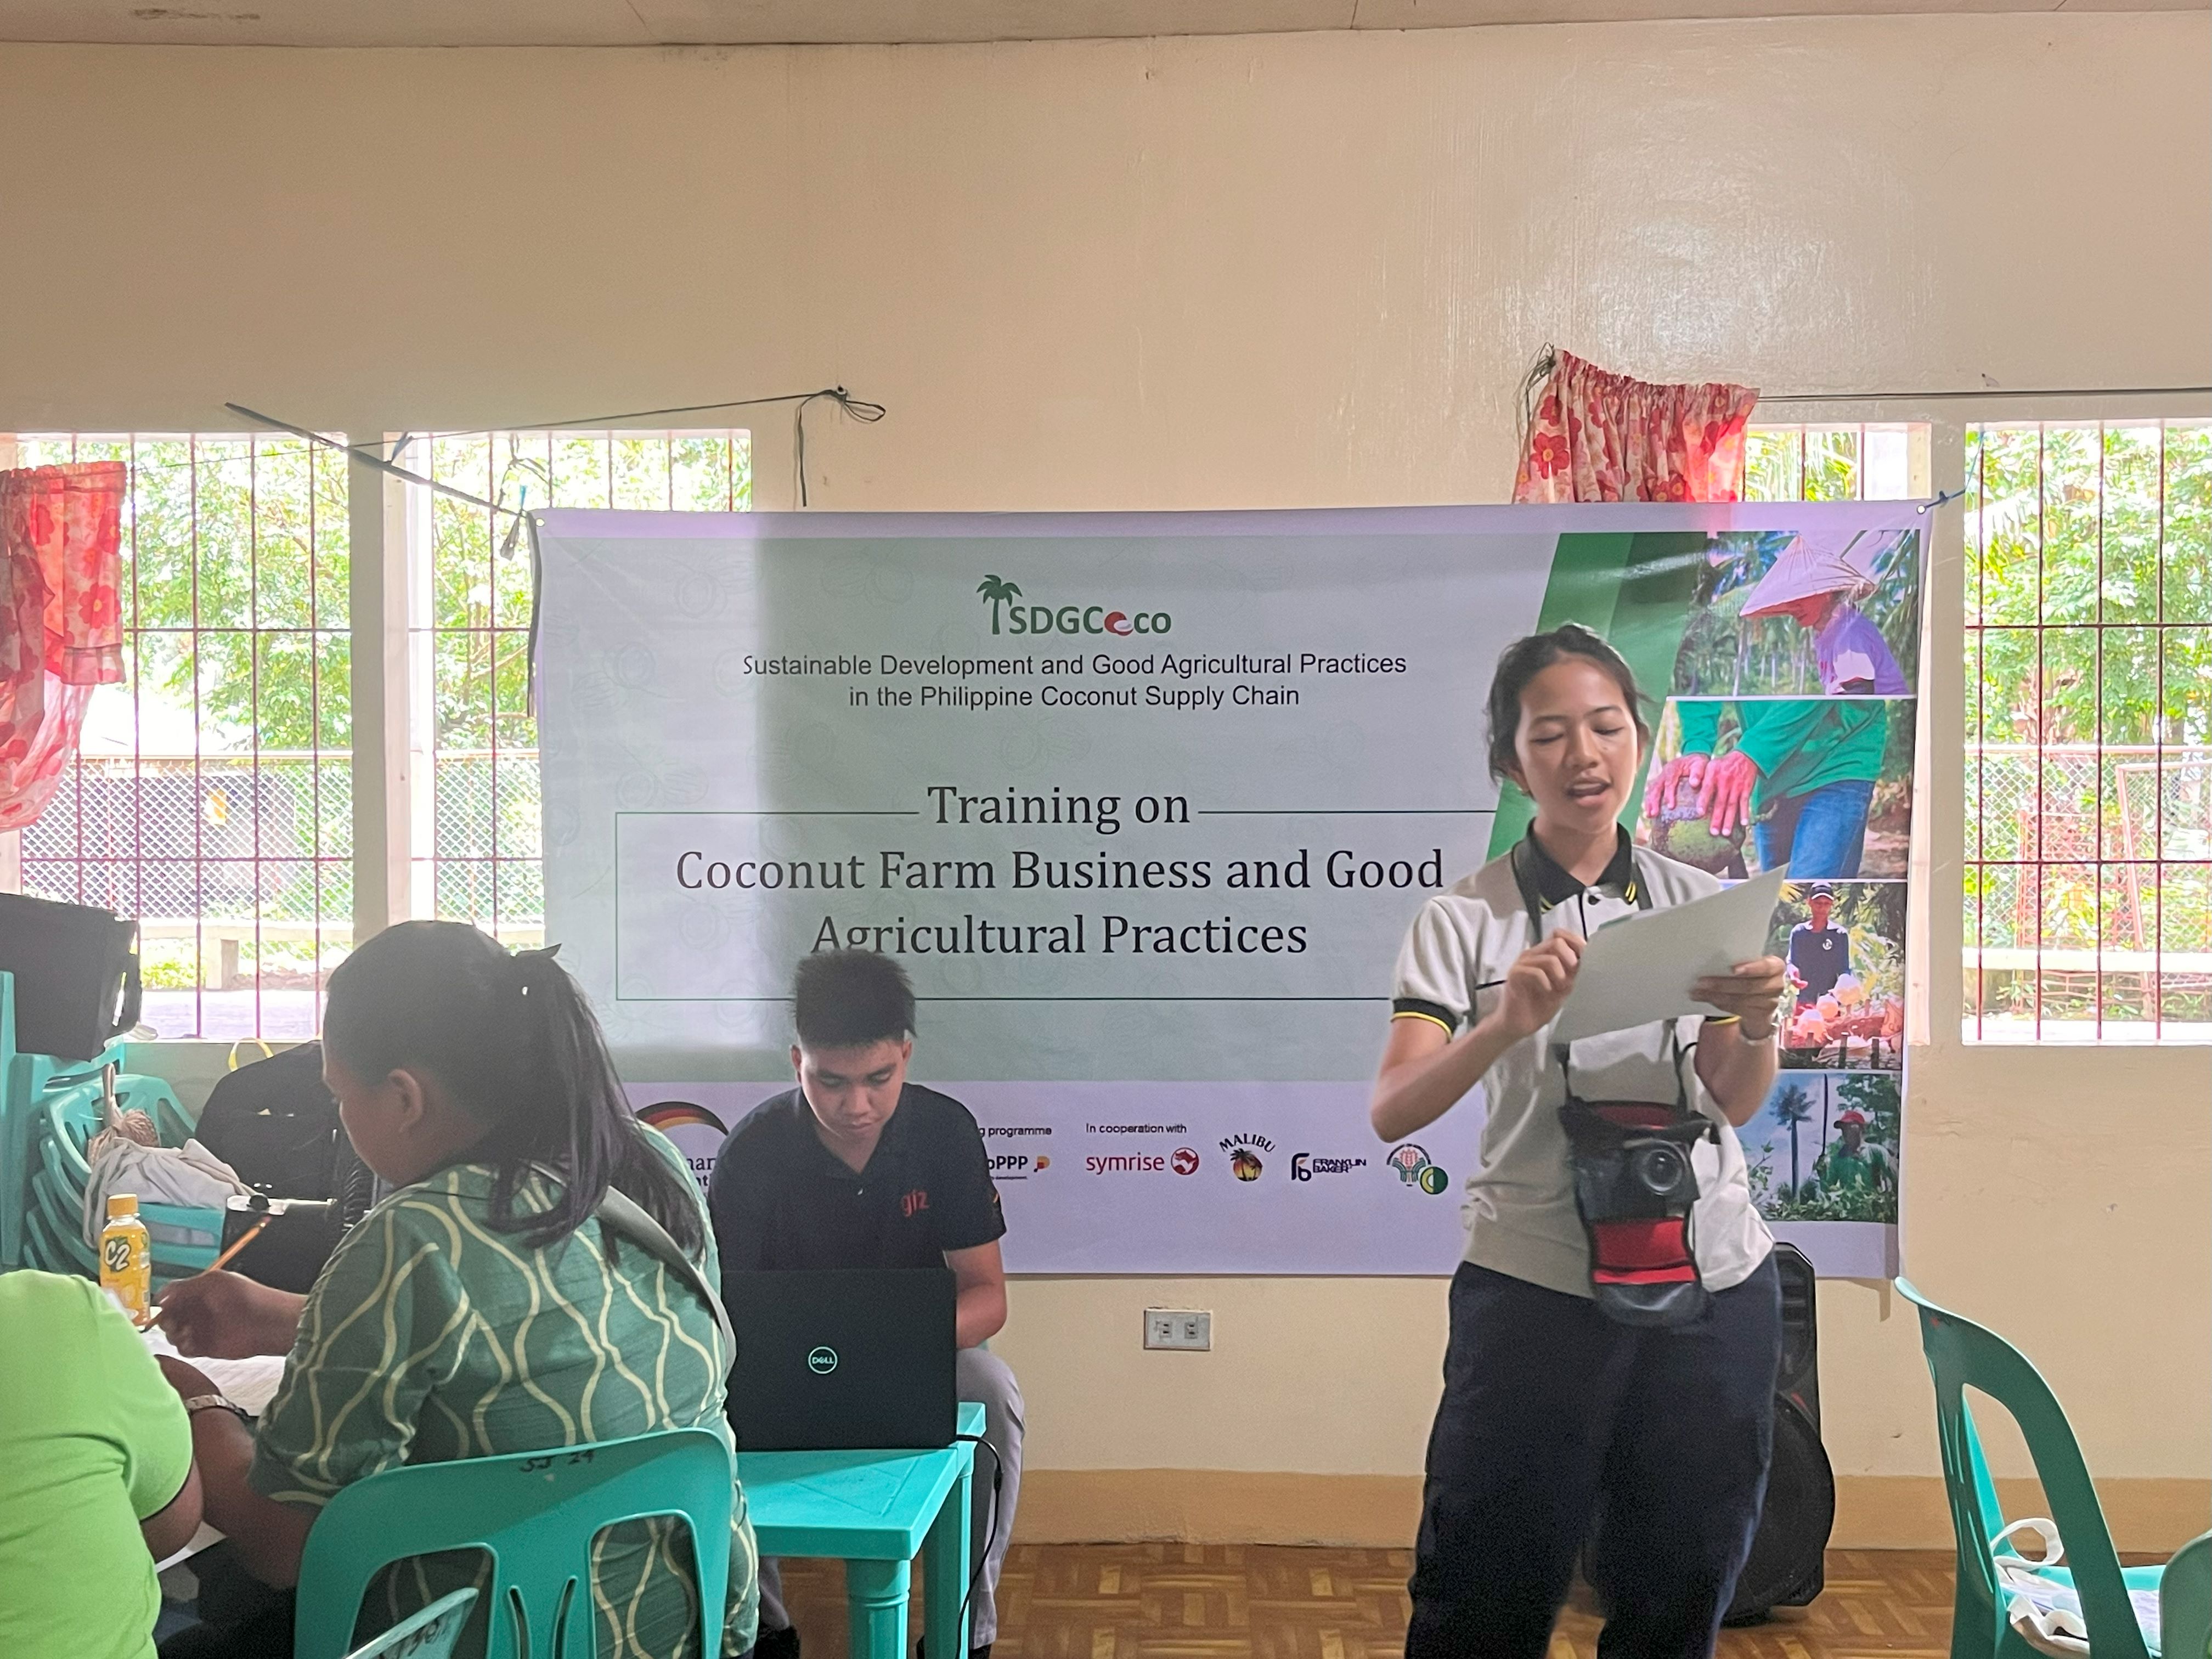 Classroom training for the SDGCoco project